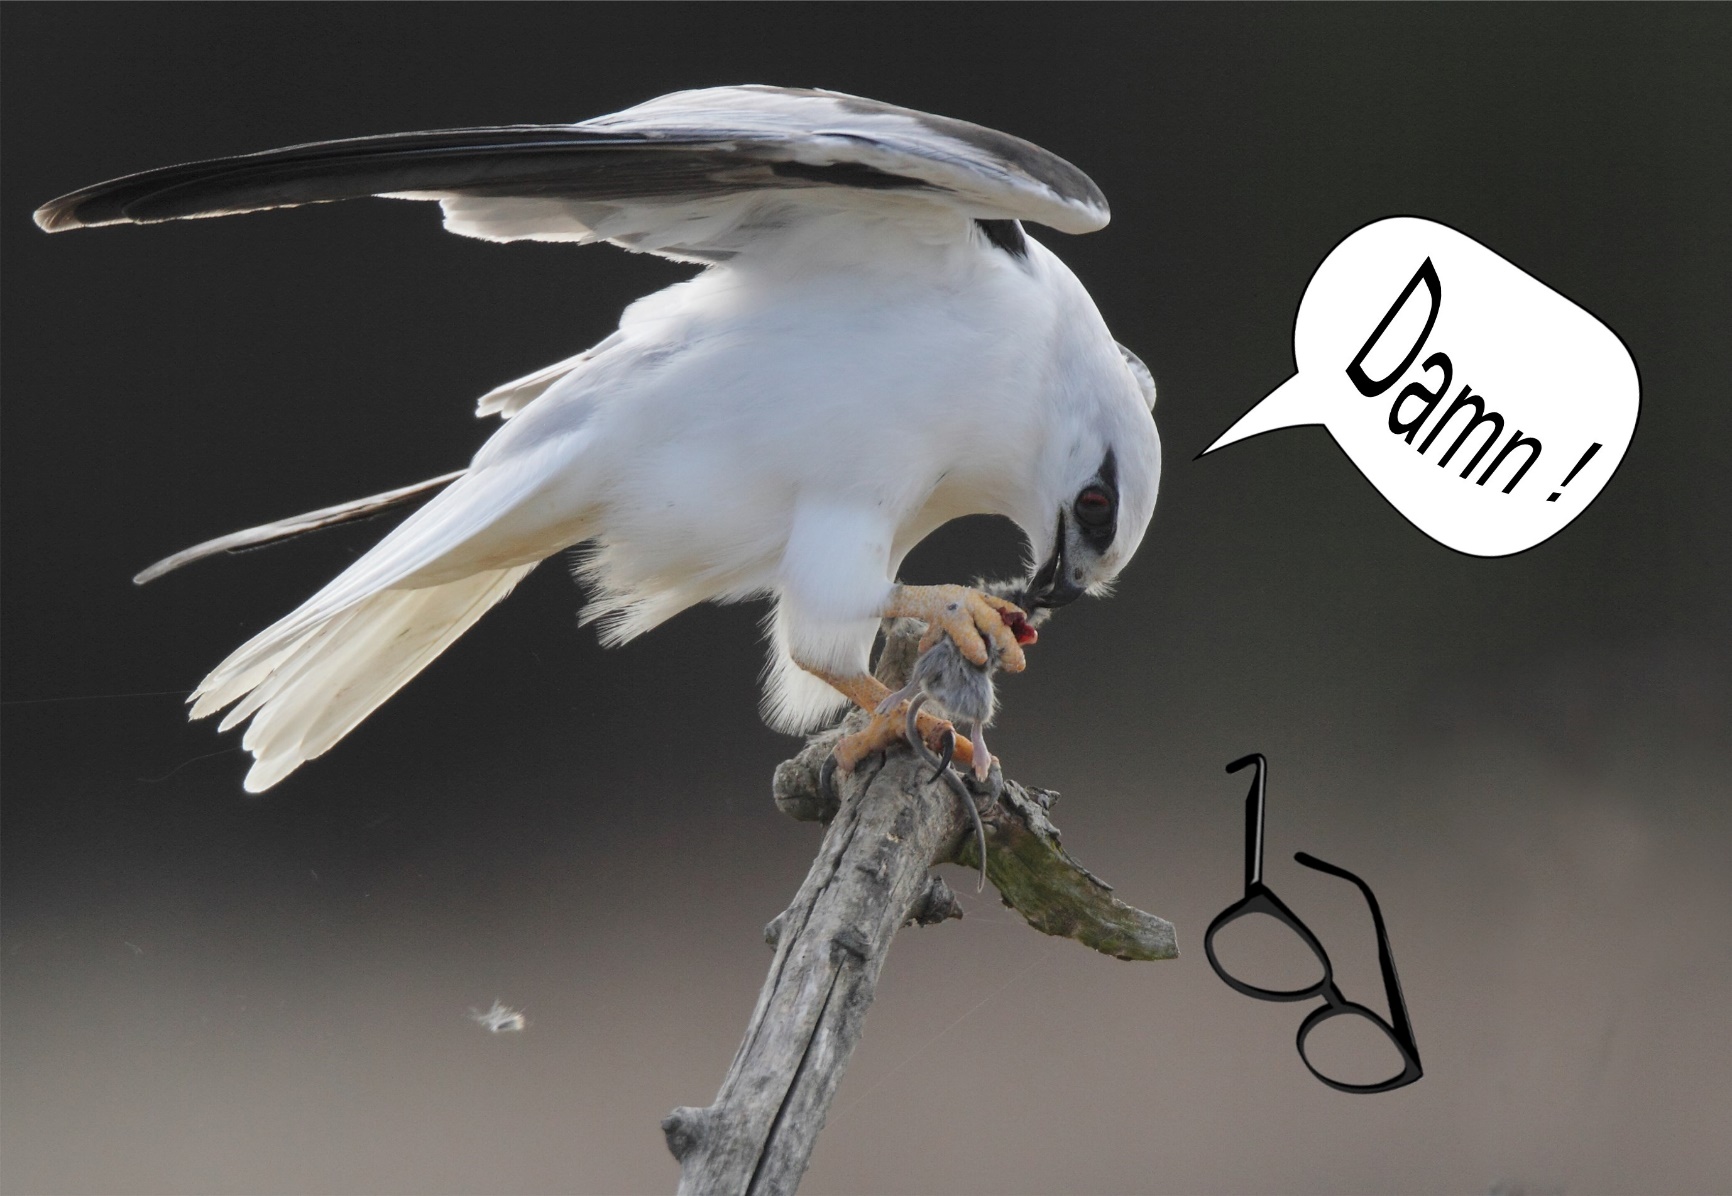 A picture containing bird

Description automatically generated